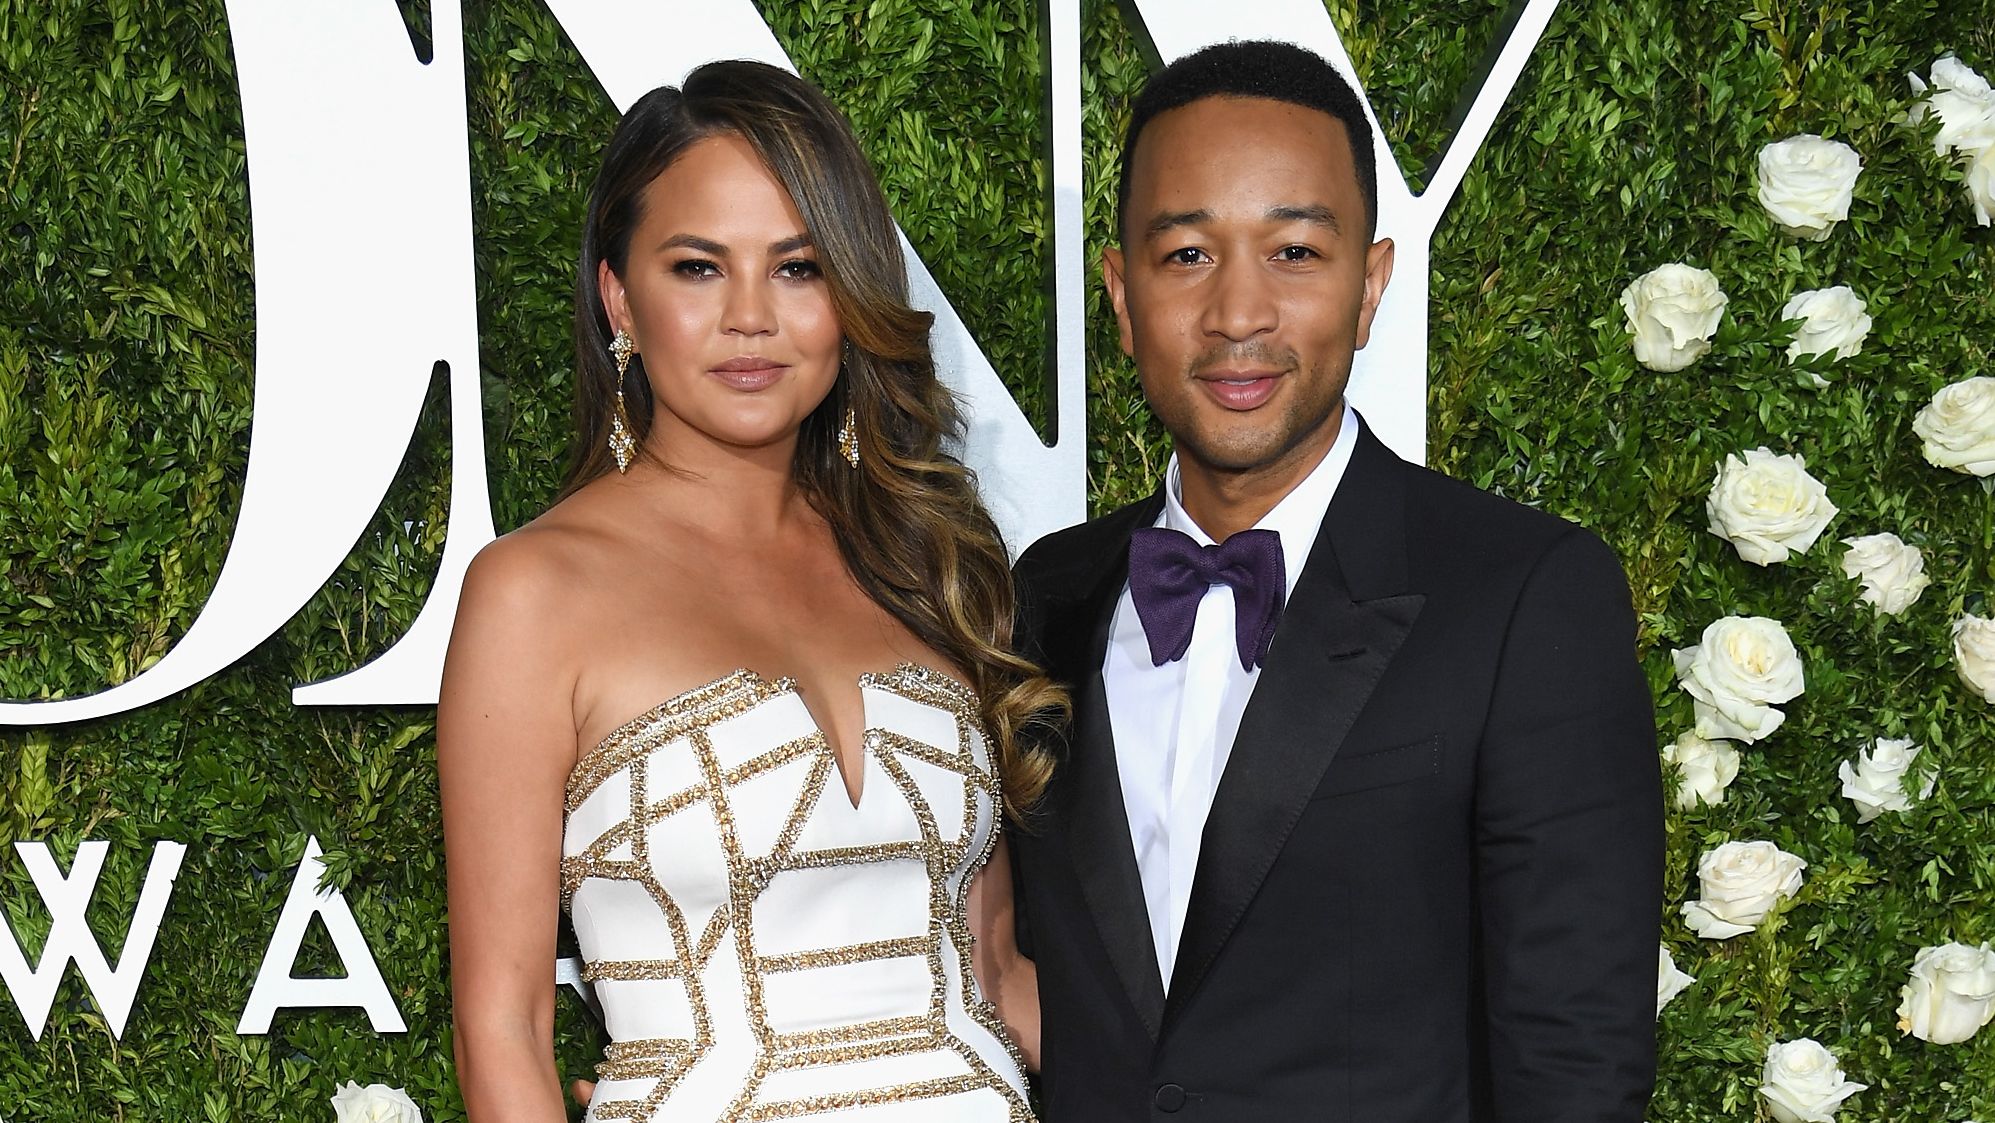 Chrissy Teigen and John Legend attend the 2017 Tony Awards at Radio City Music Hall on June 11, 2017 in New York City. 